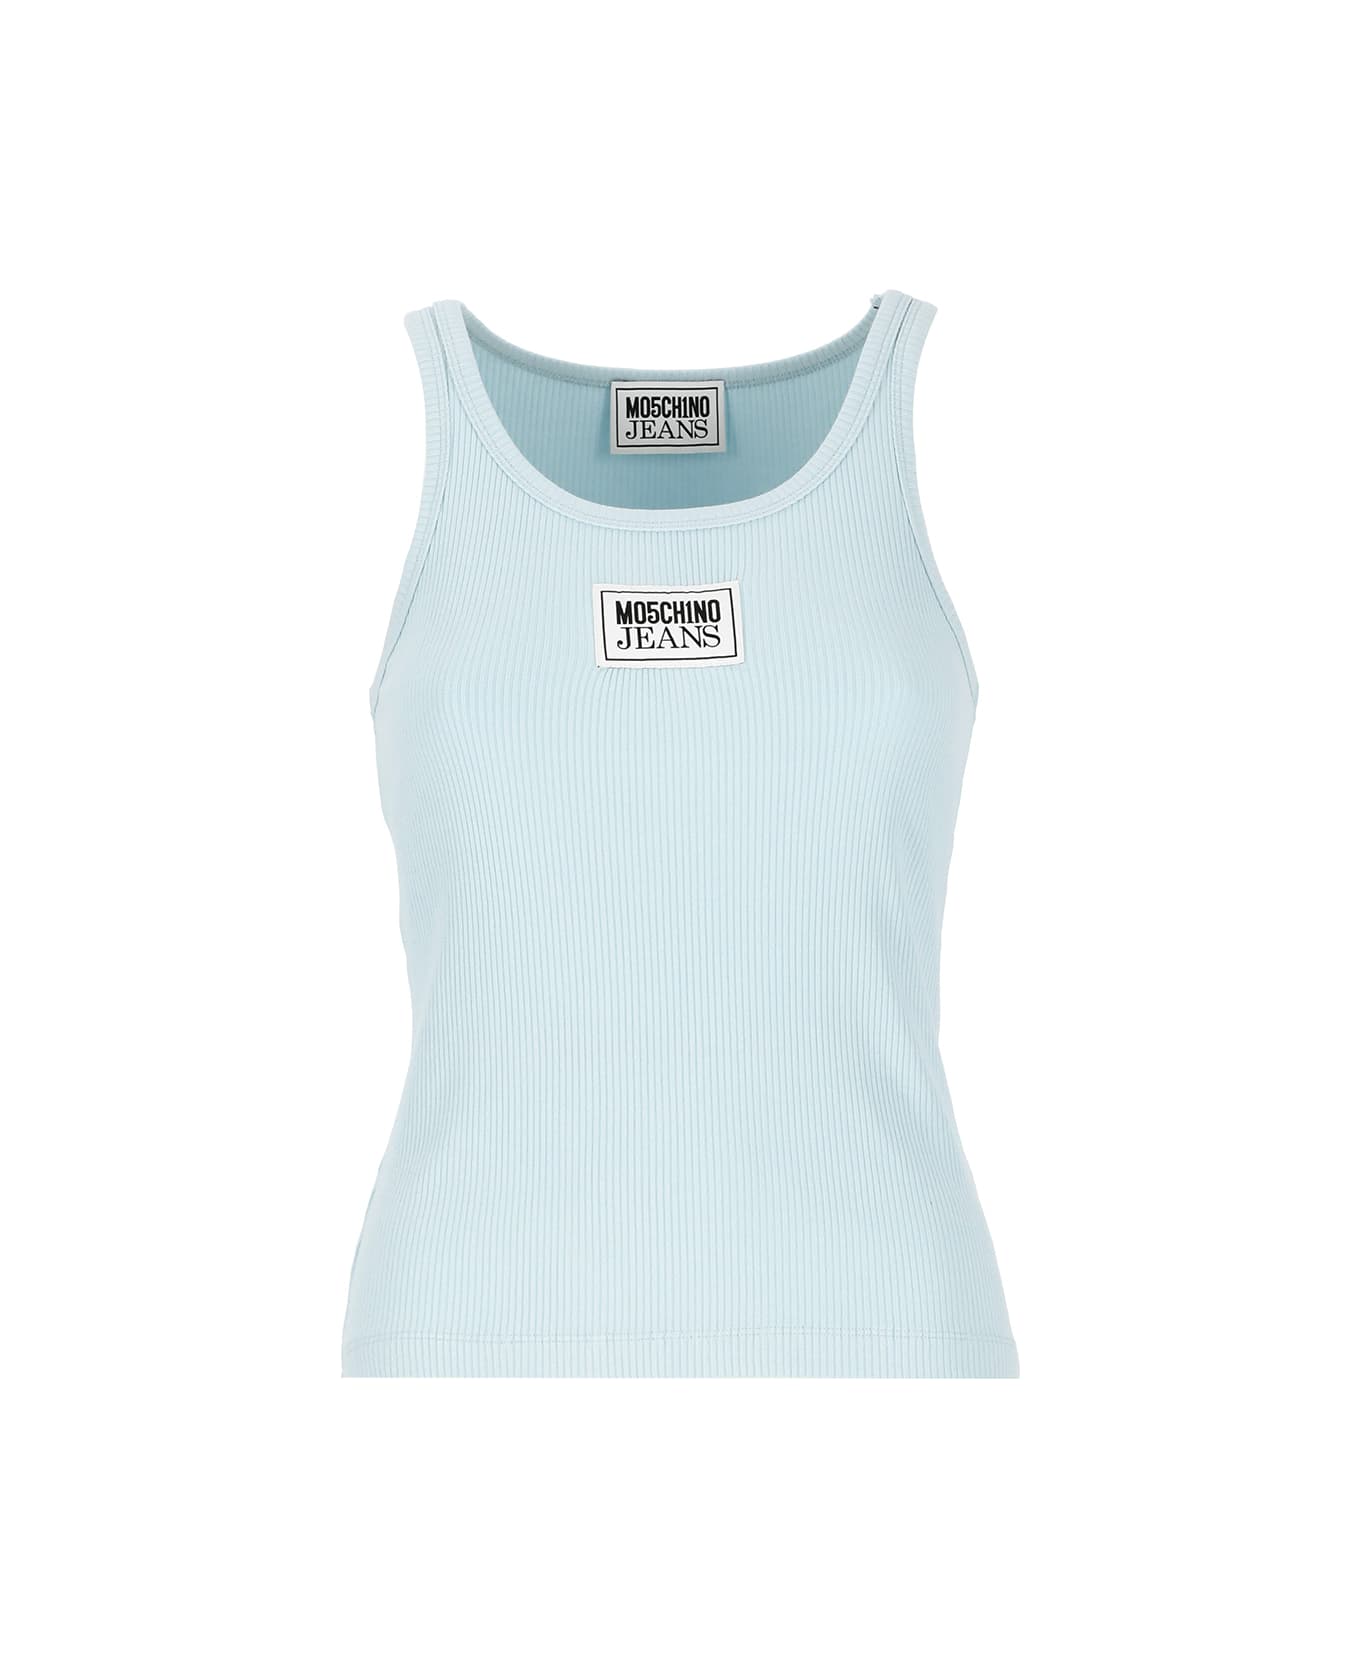 M05CH1N0 Jeans Tops With Logo - Light Blue